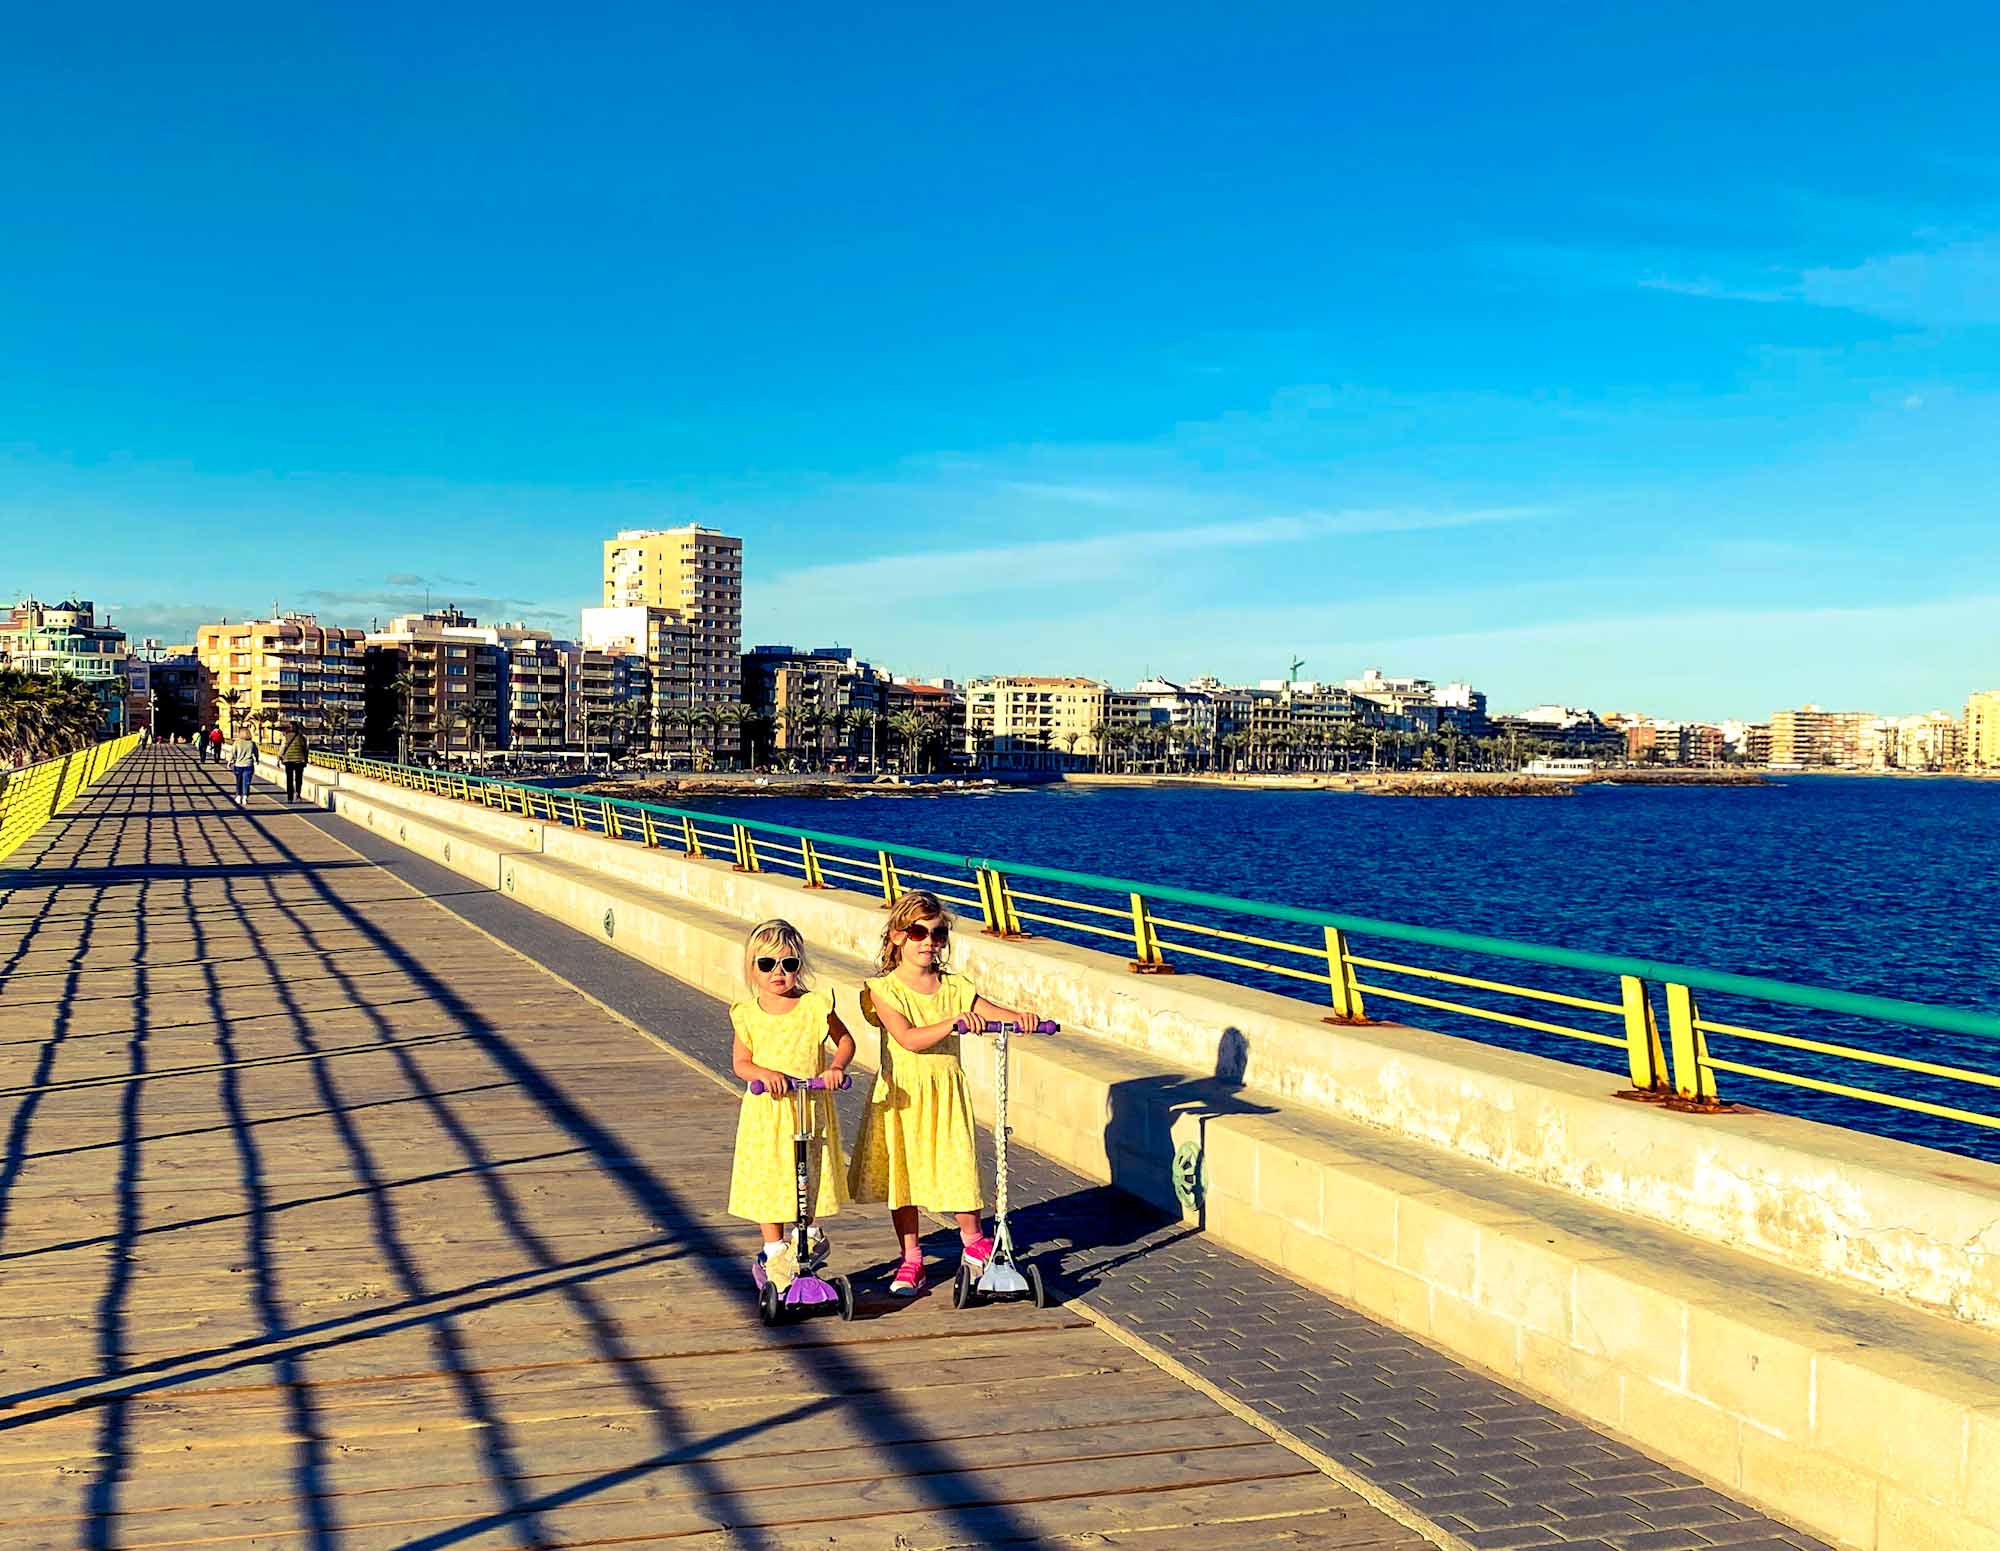 2 girls riding scooters along a seafront boardwalk